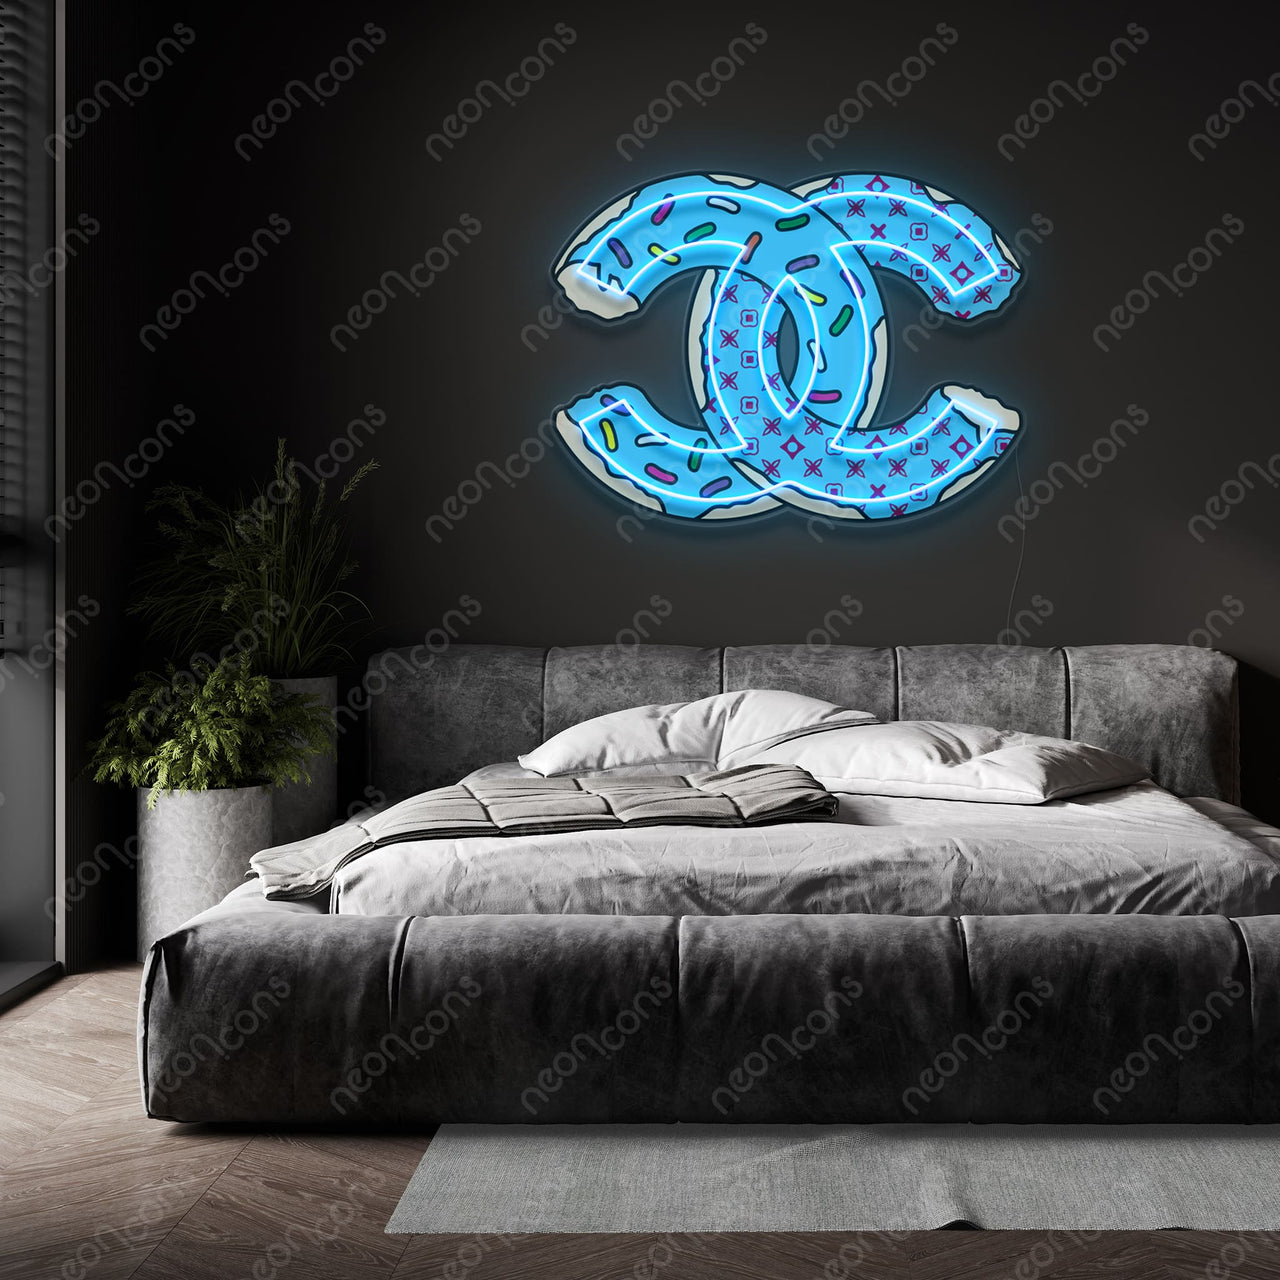 "Coco-Nut" LED Neon x Acrylic Artwork by Neon Icons